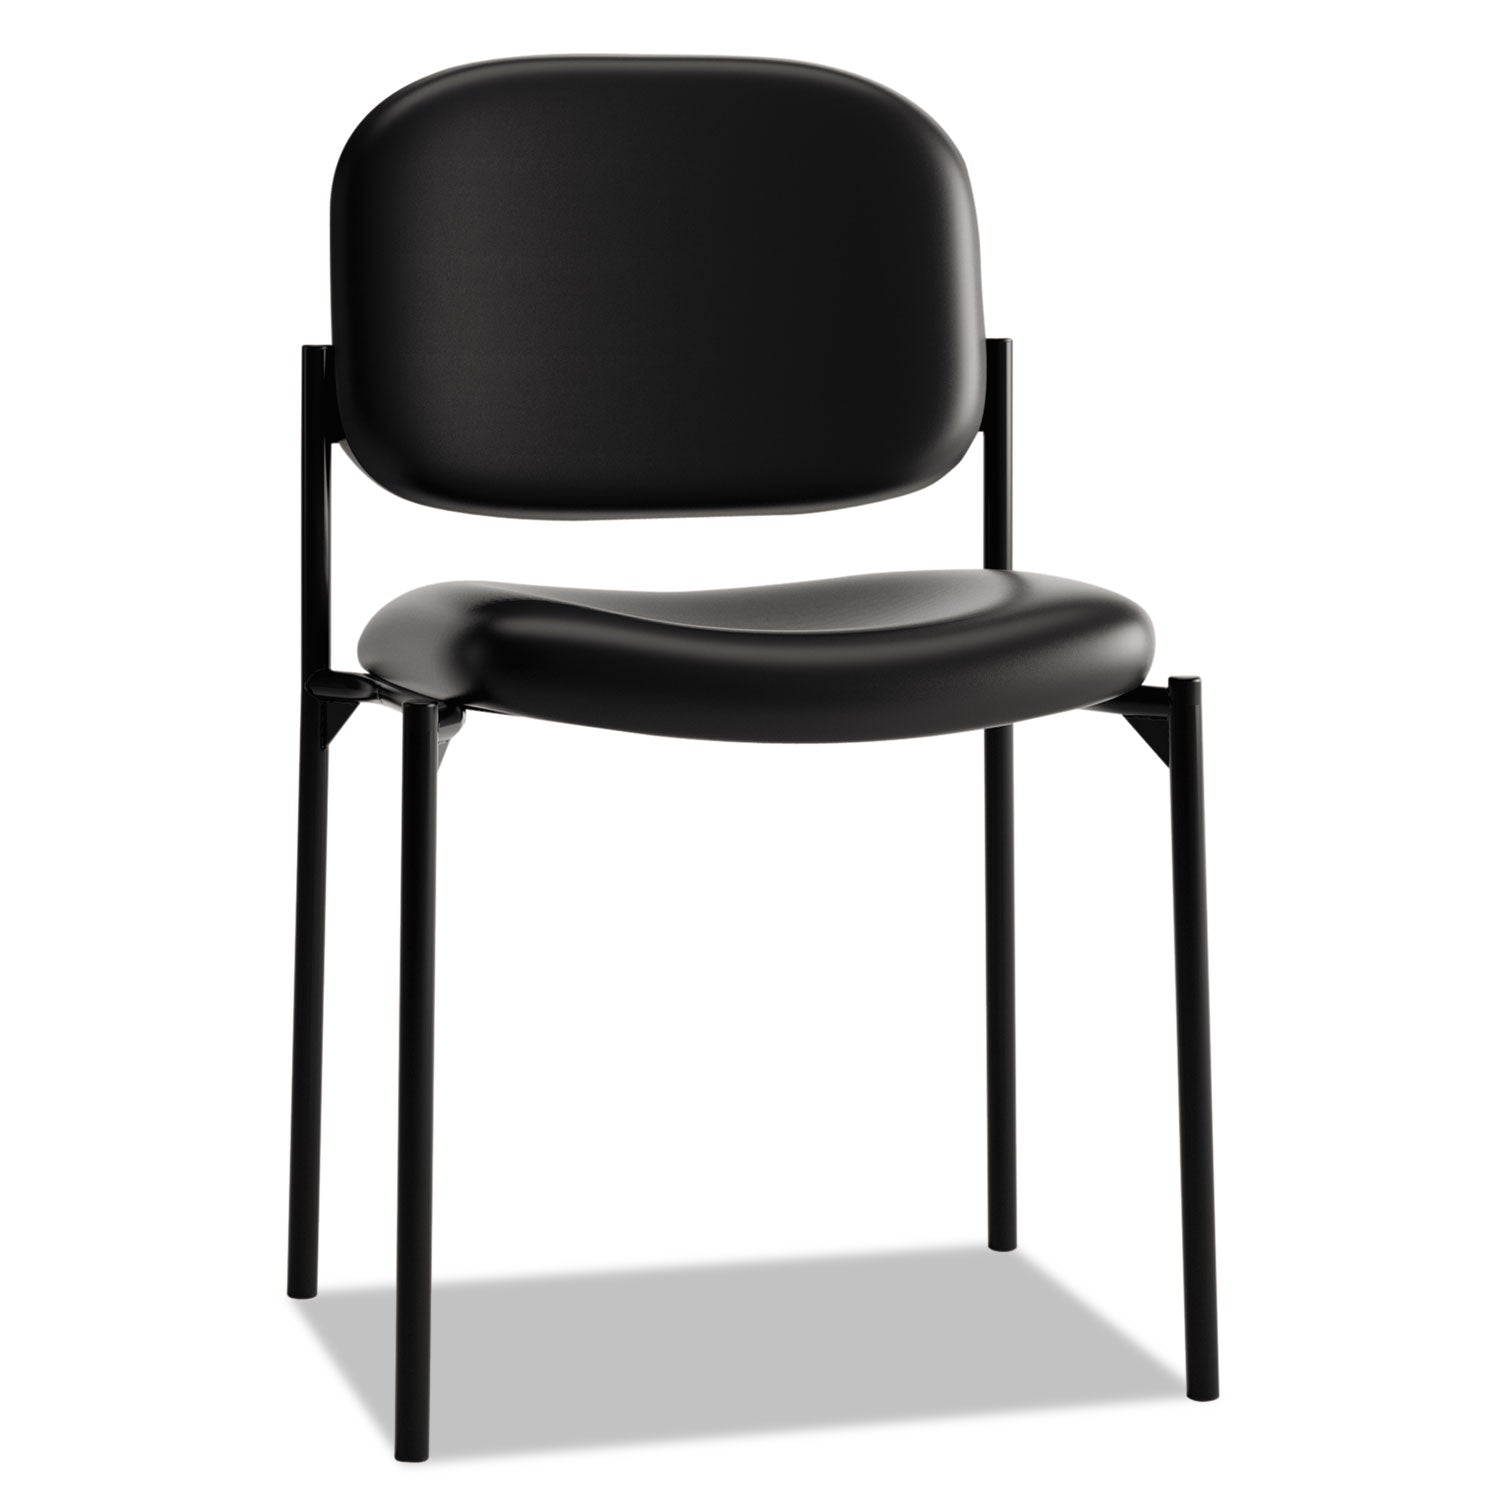 VL606 Stacking Guest Chair without Arms, Bonded Leather Upholstery, 21.25" x 21" x 32.75", Black Seat, Black Back, Black Base - 